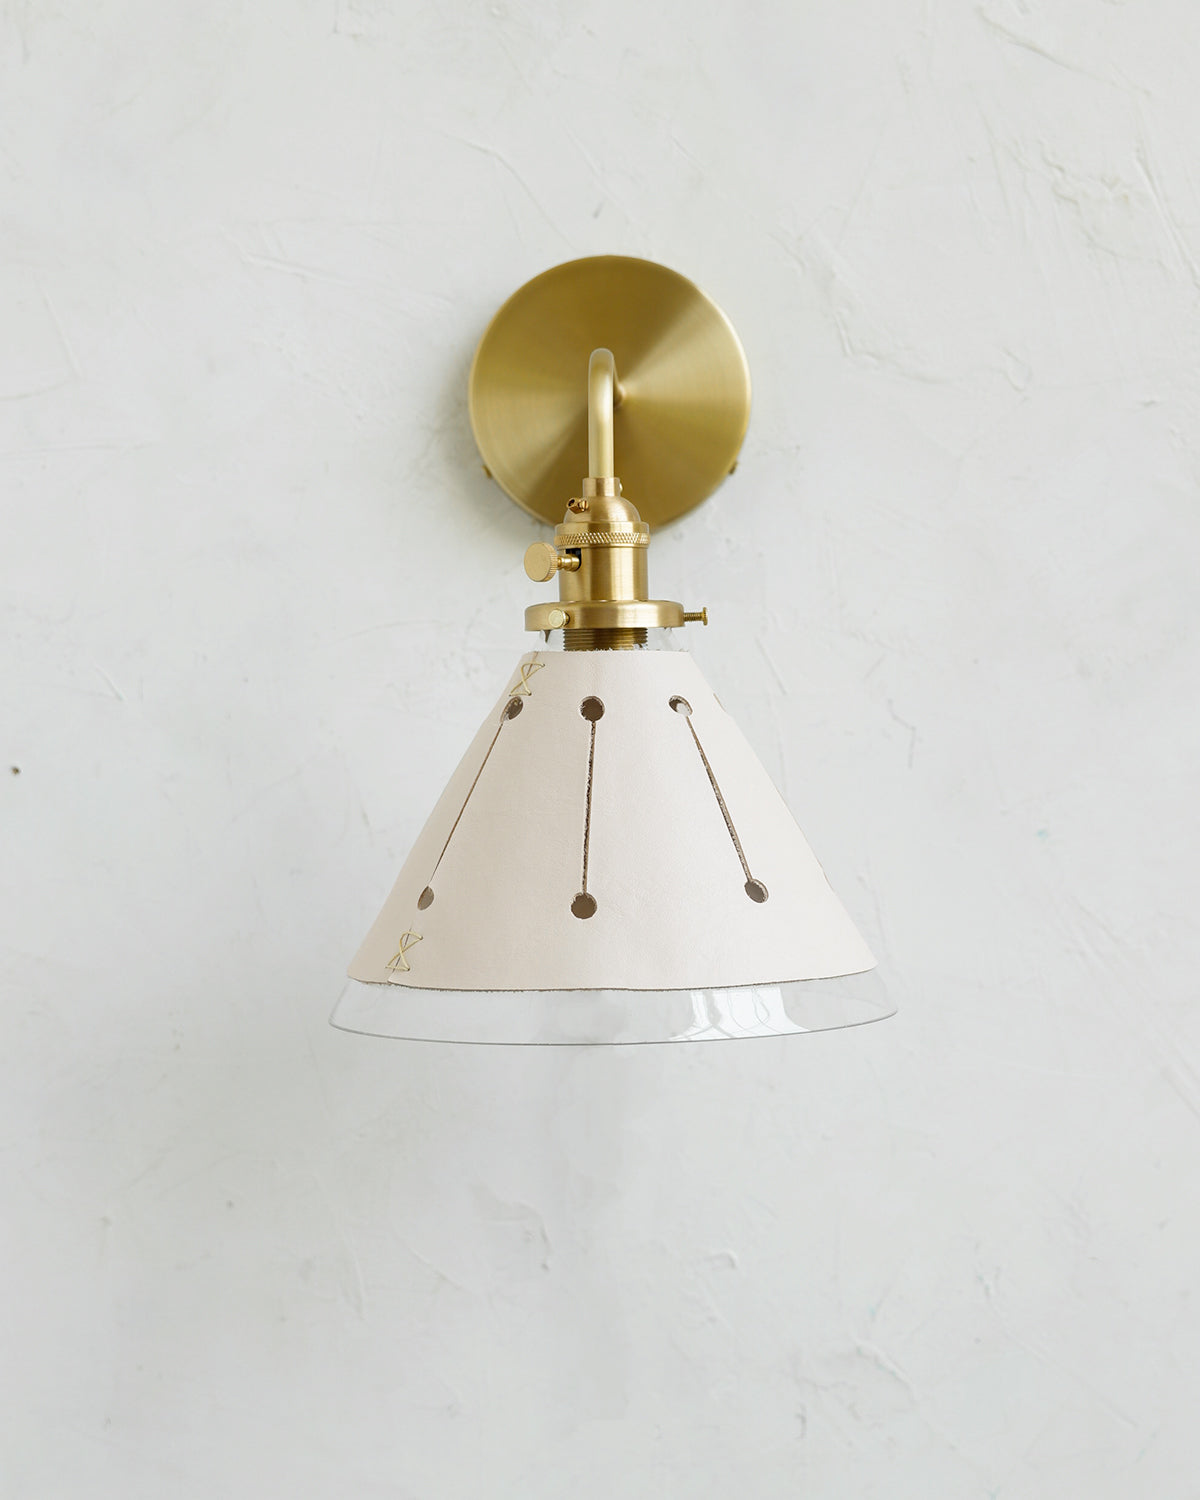 Classic satin brass wall sconce with cone glass diffuser and decorative handstitched leather shade